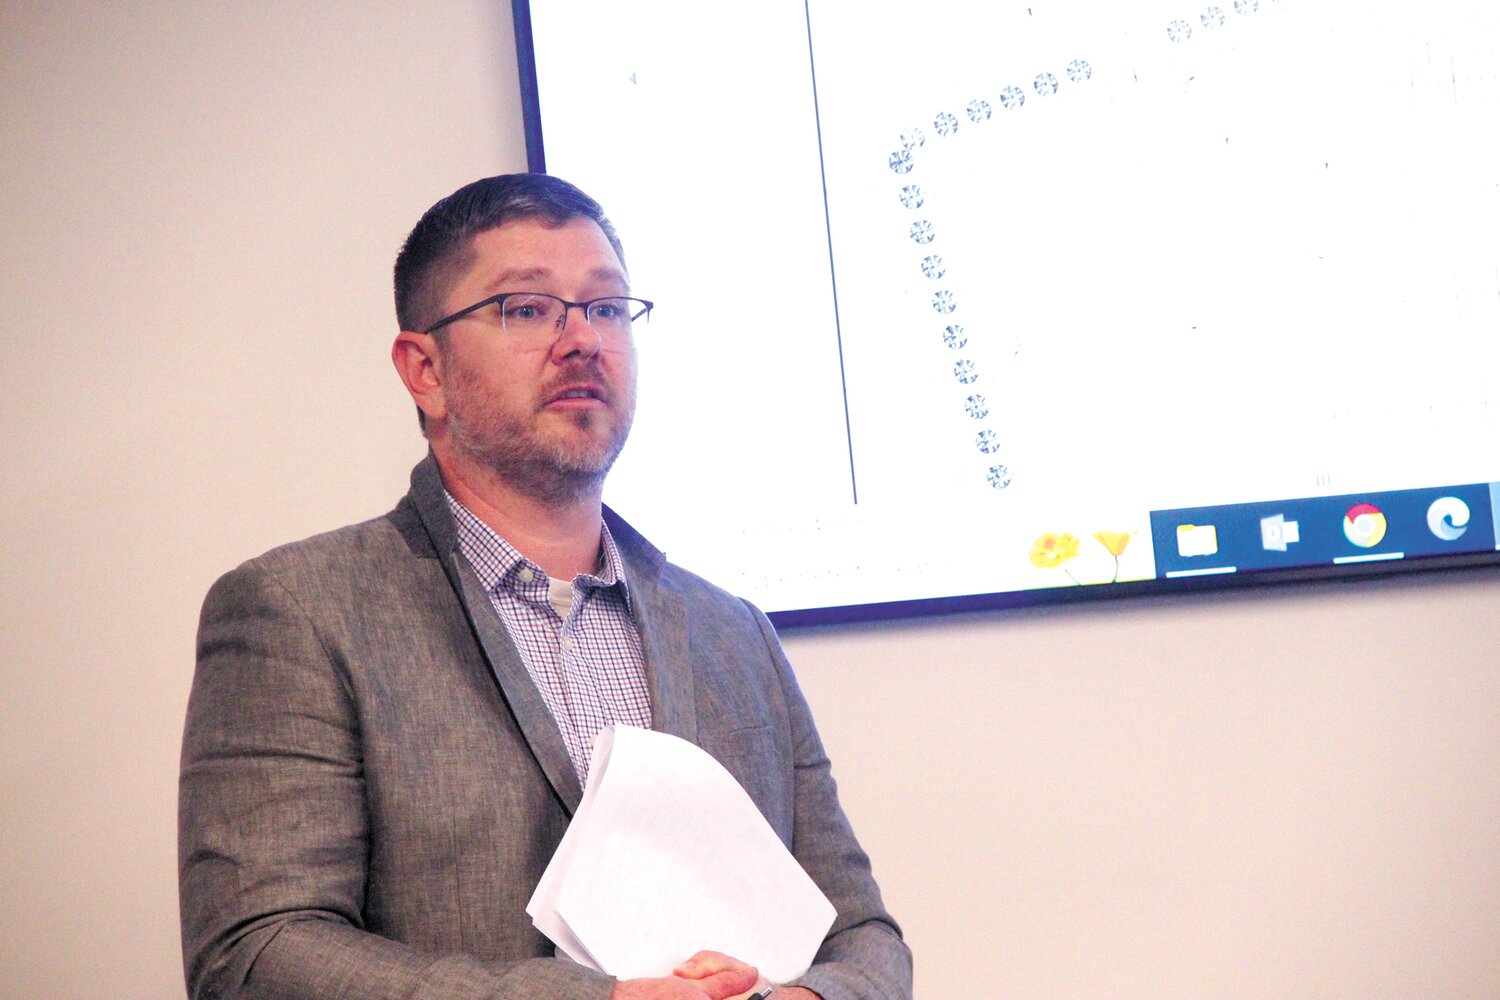 SPELLING OUT THE DETAILS: Brad Parsons, director of design and permitting for Verogy that proposes to build a solar farm on Knight Street made the Planning Board presentation. (Warwick Beacon photos)